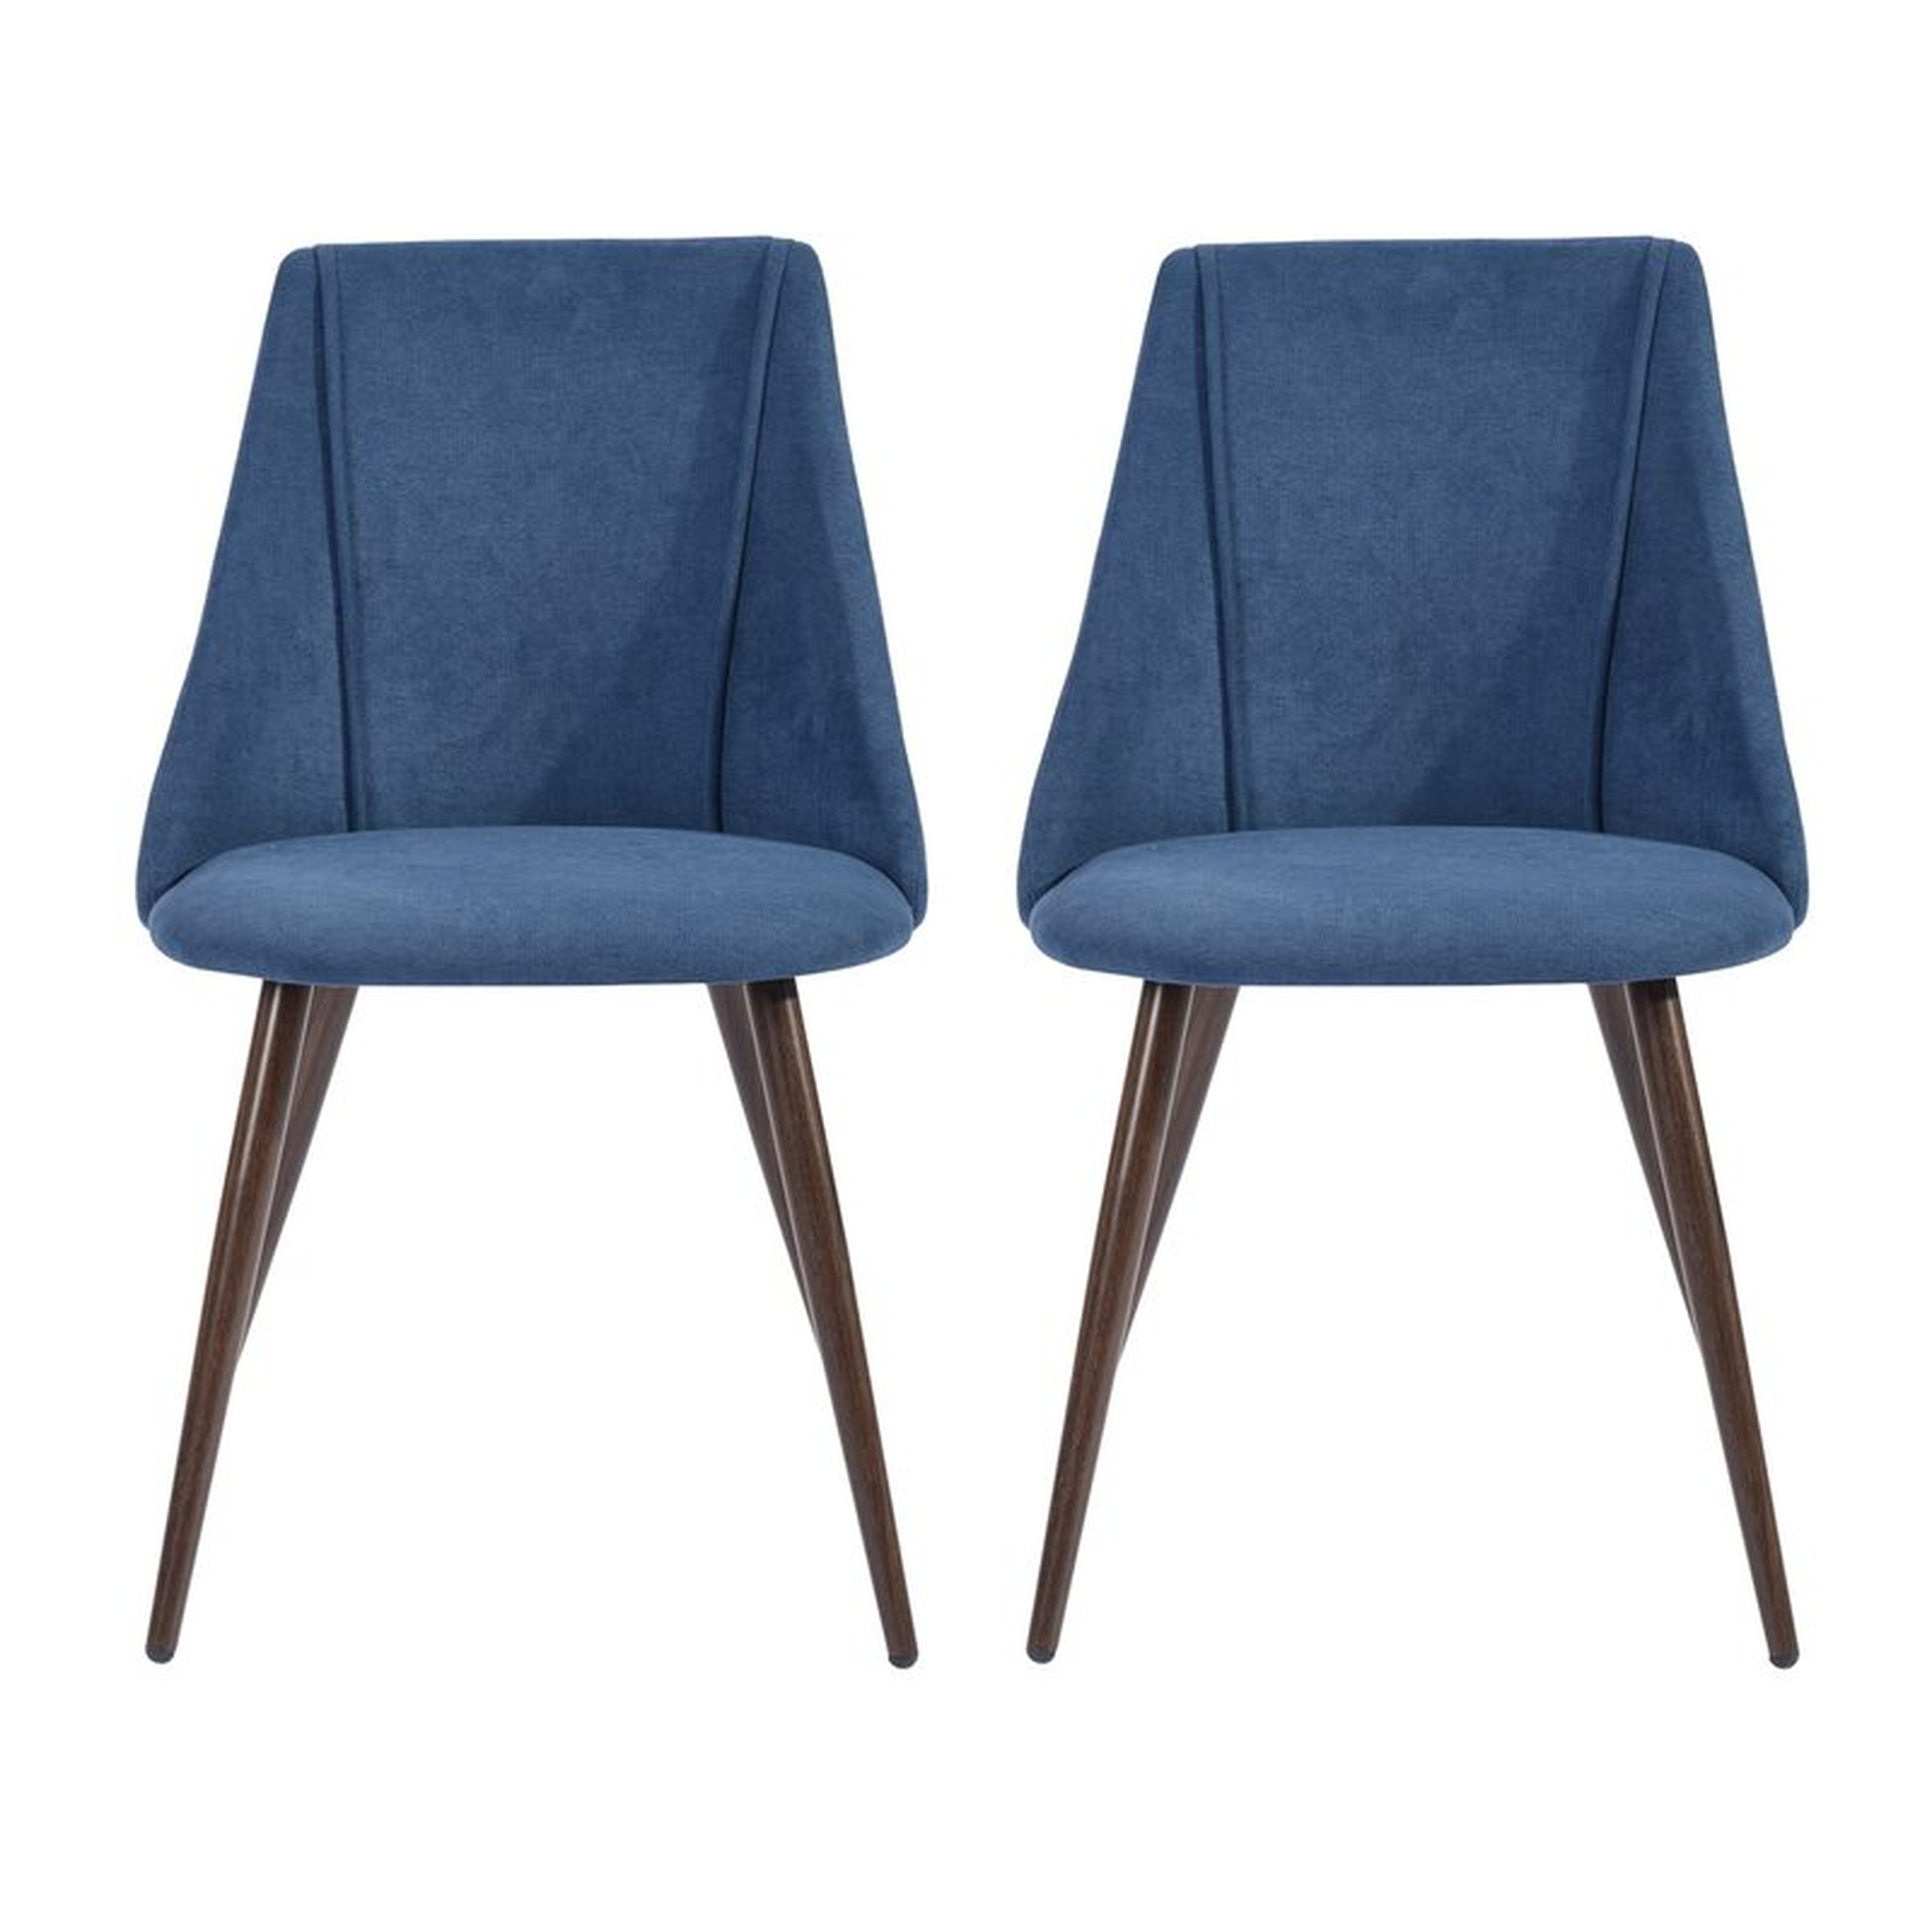 Camron Upholstered Side Chair (Set of 2) - Wayfair